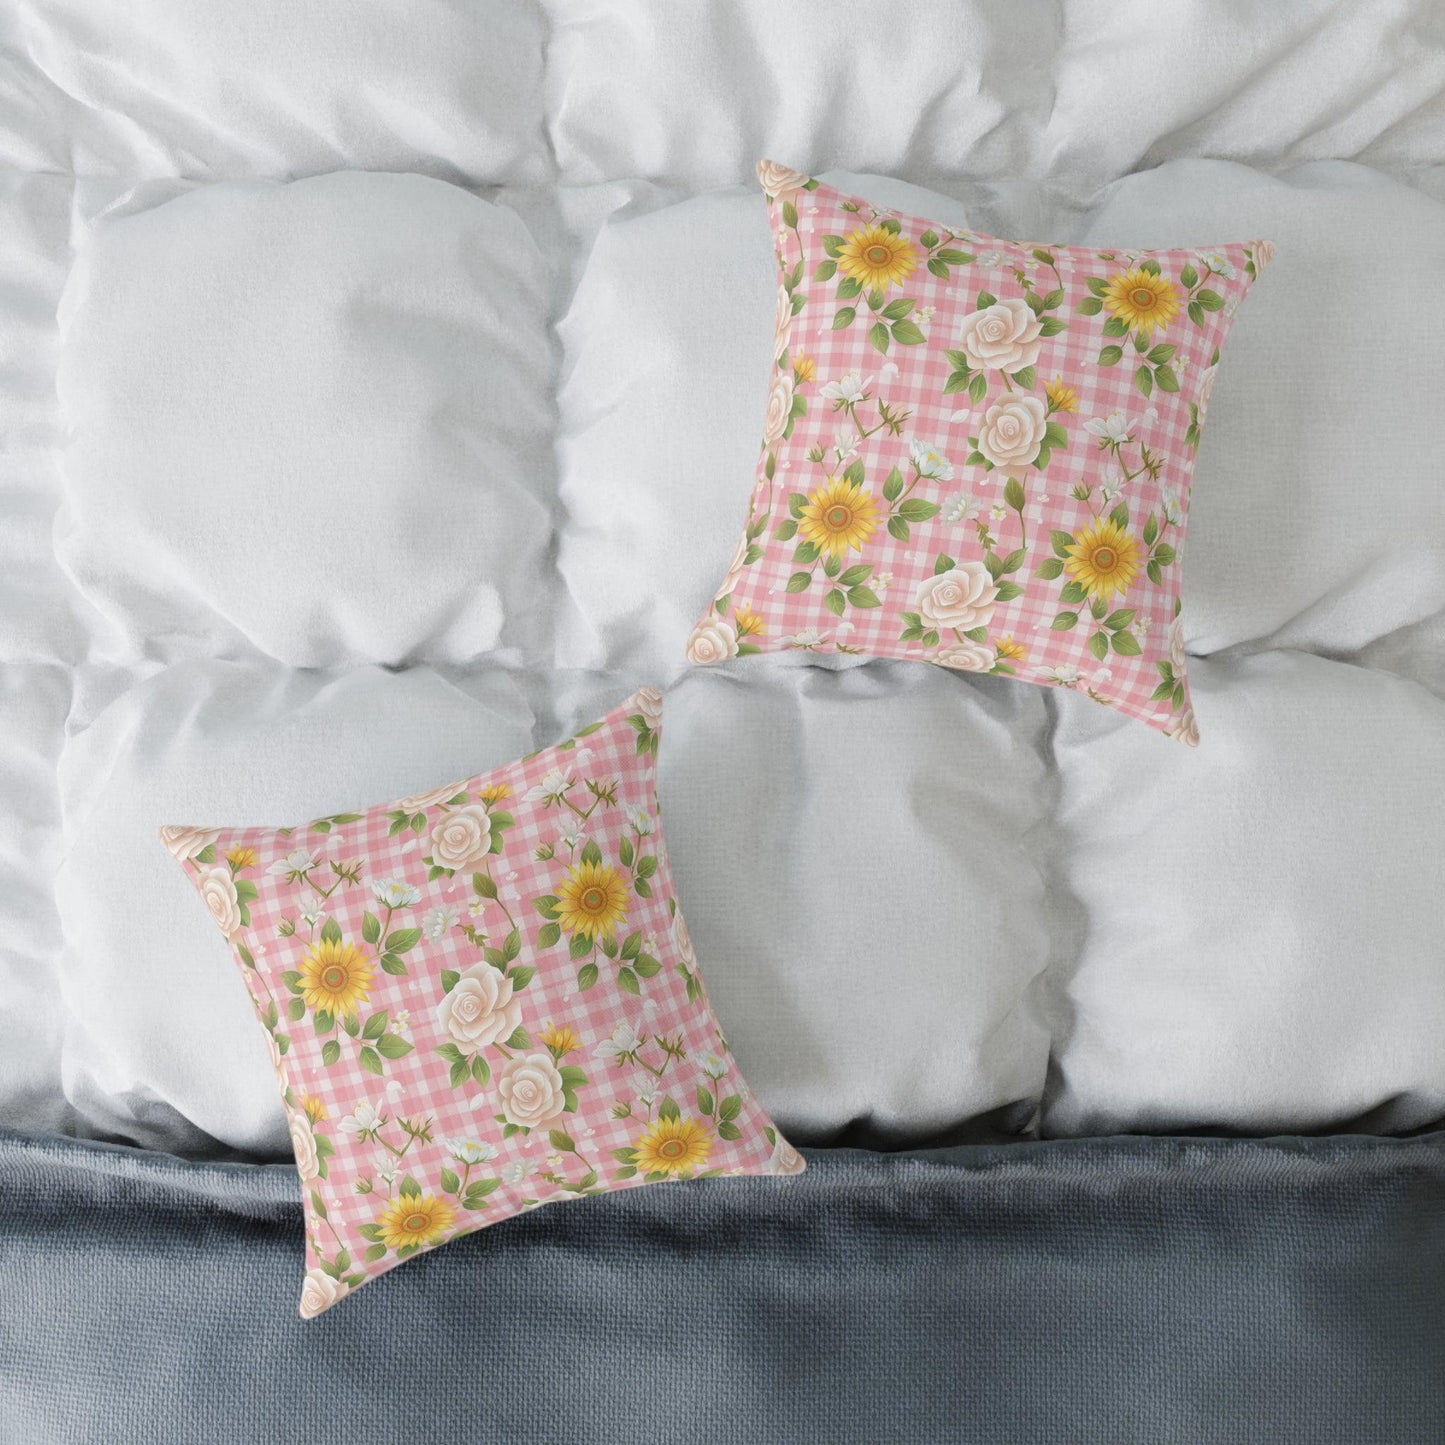 Pink Gingham Floral Cushion: A Blooming Beauty - Cottage Garden Decor